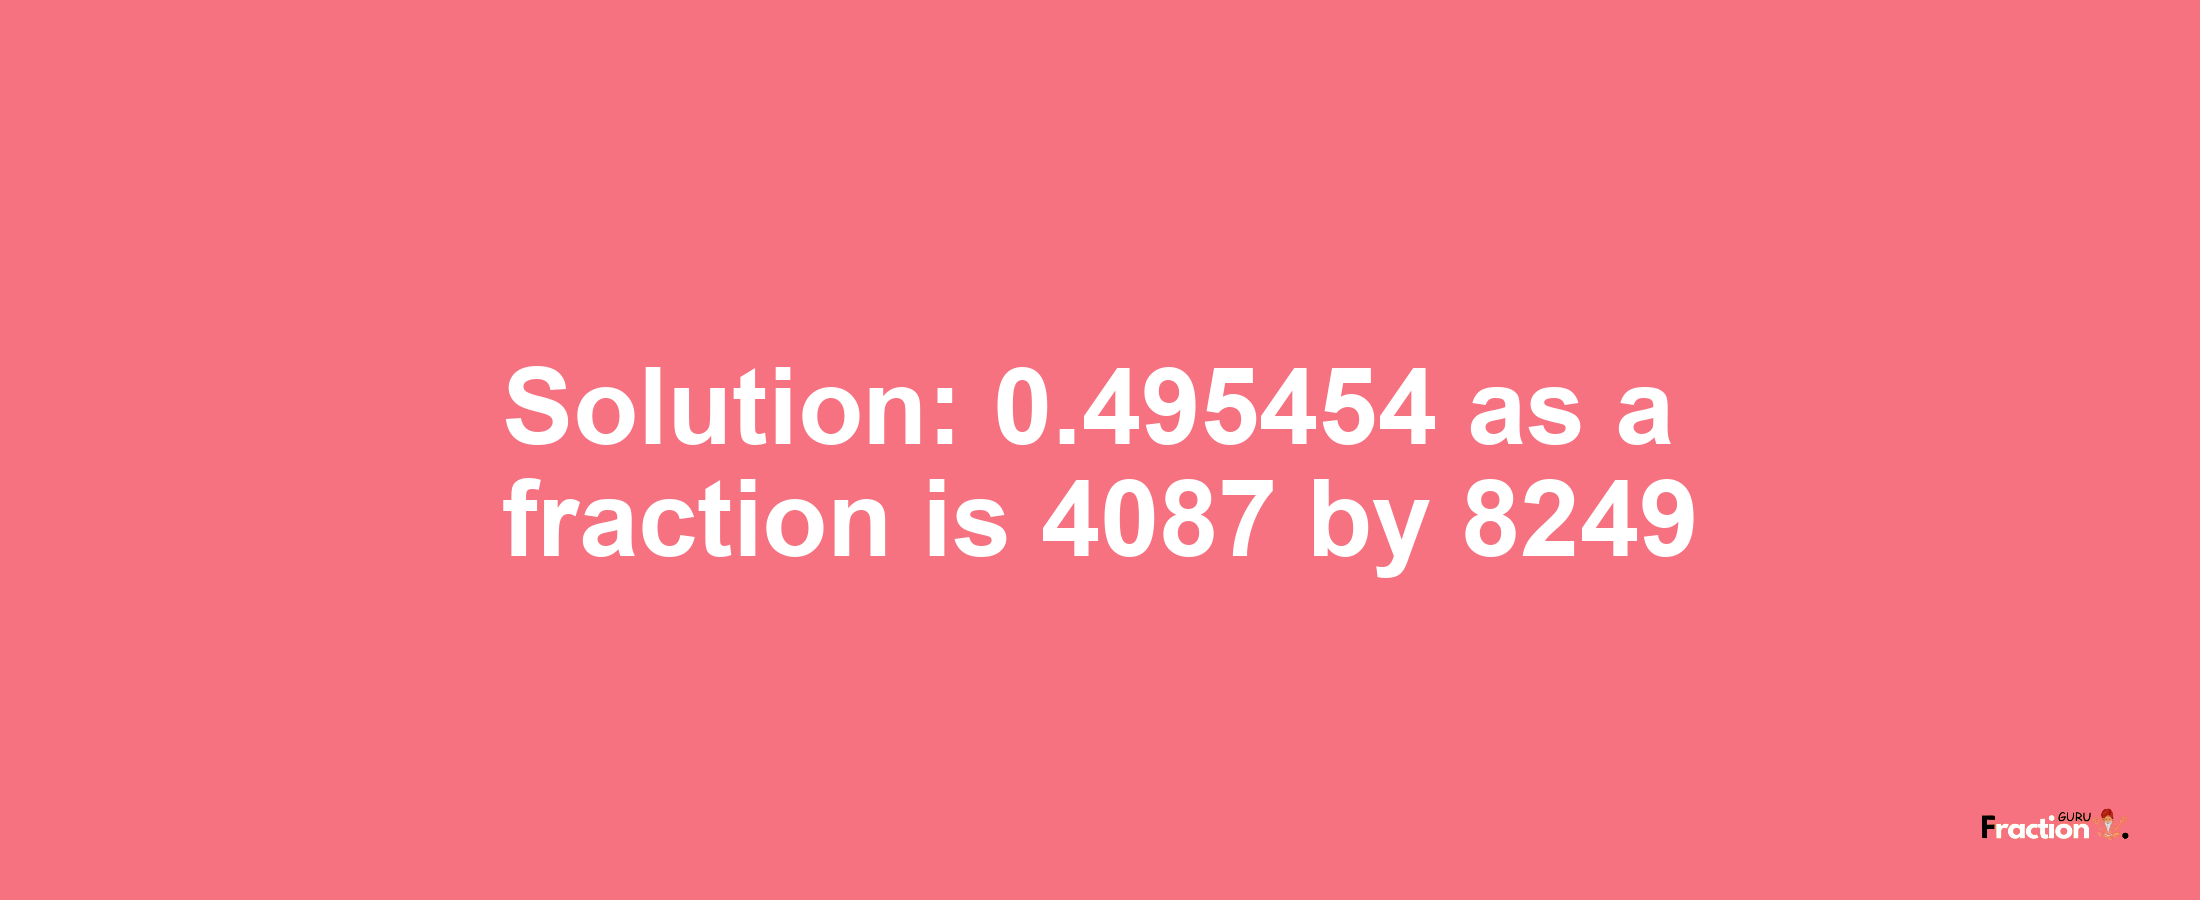 Solution:0.495454 as a fraction is 4087/8249